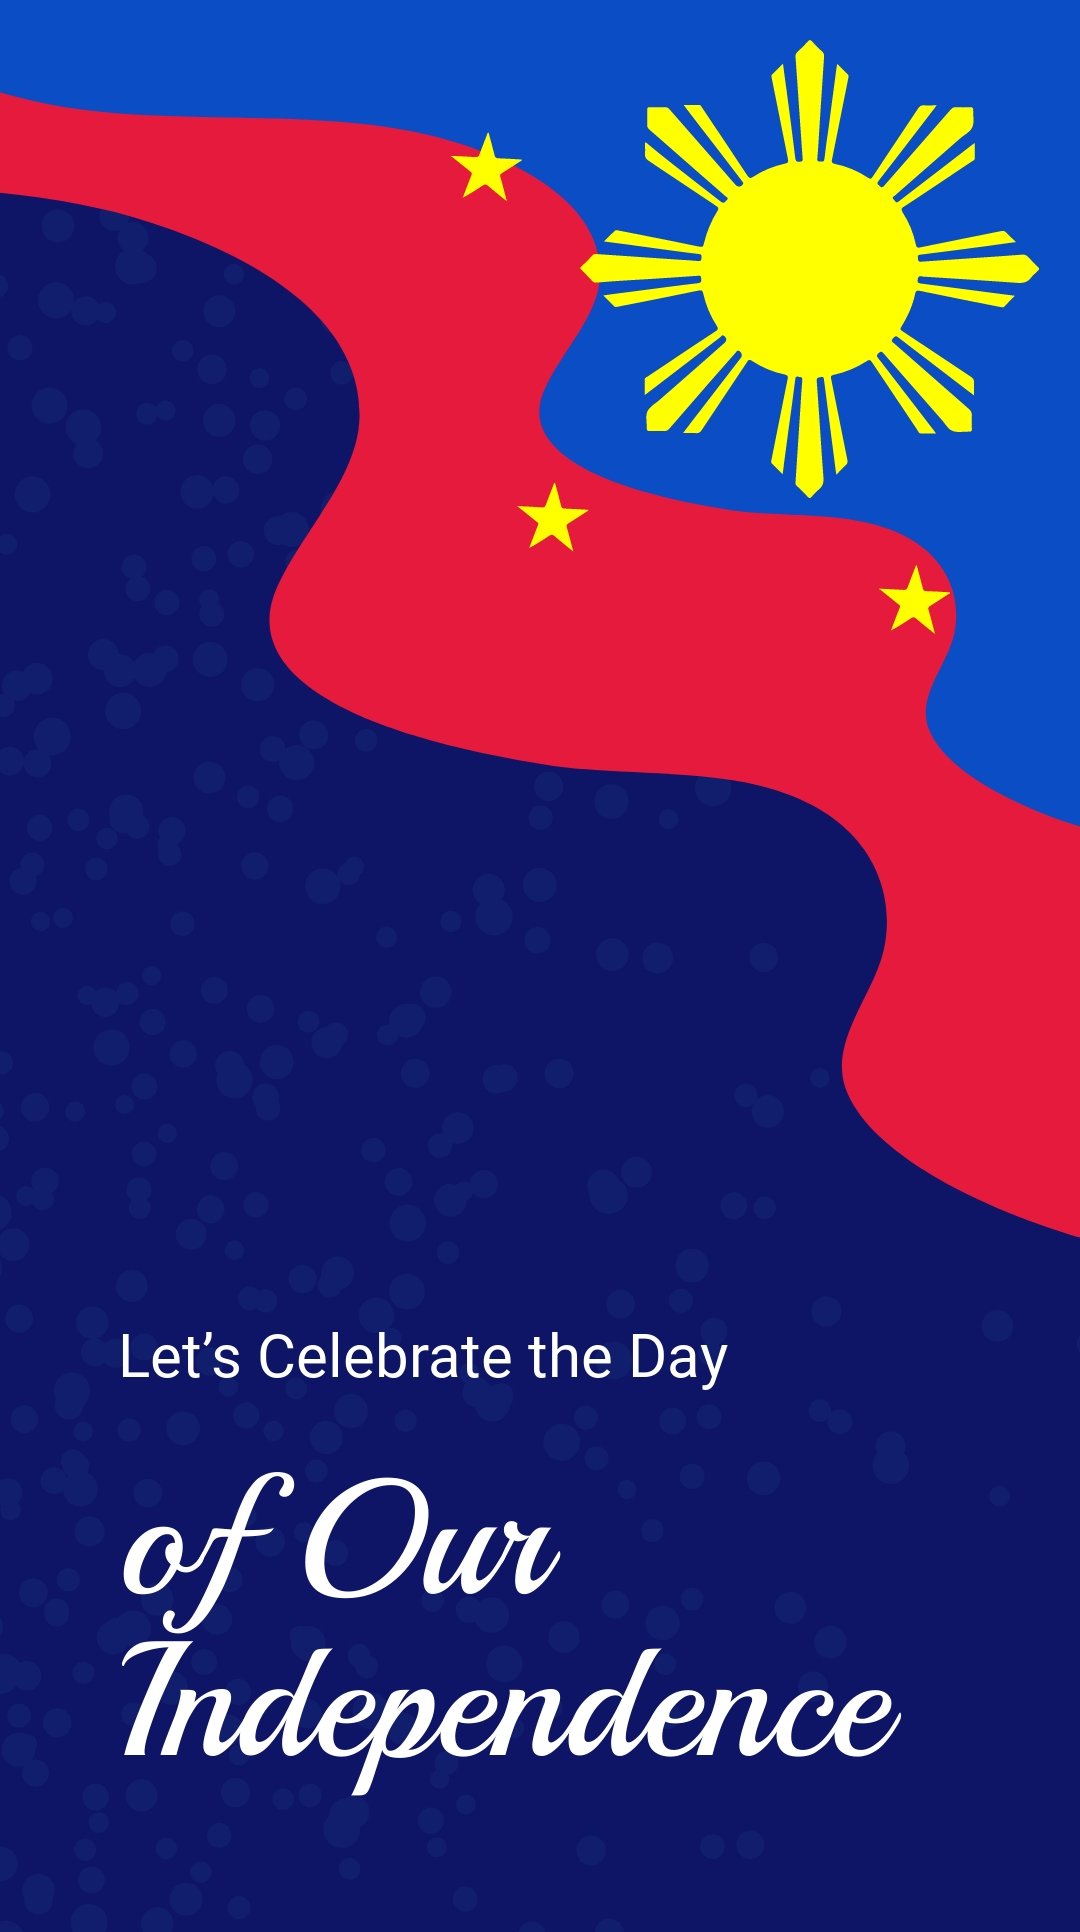 Philippines Independence Day Celebration Whatsapp Post Template